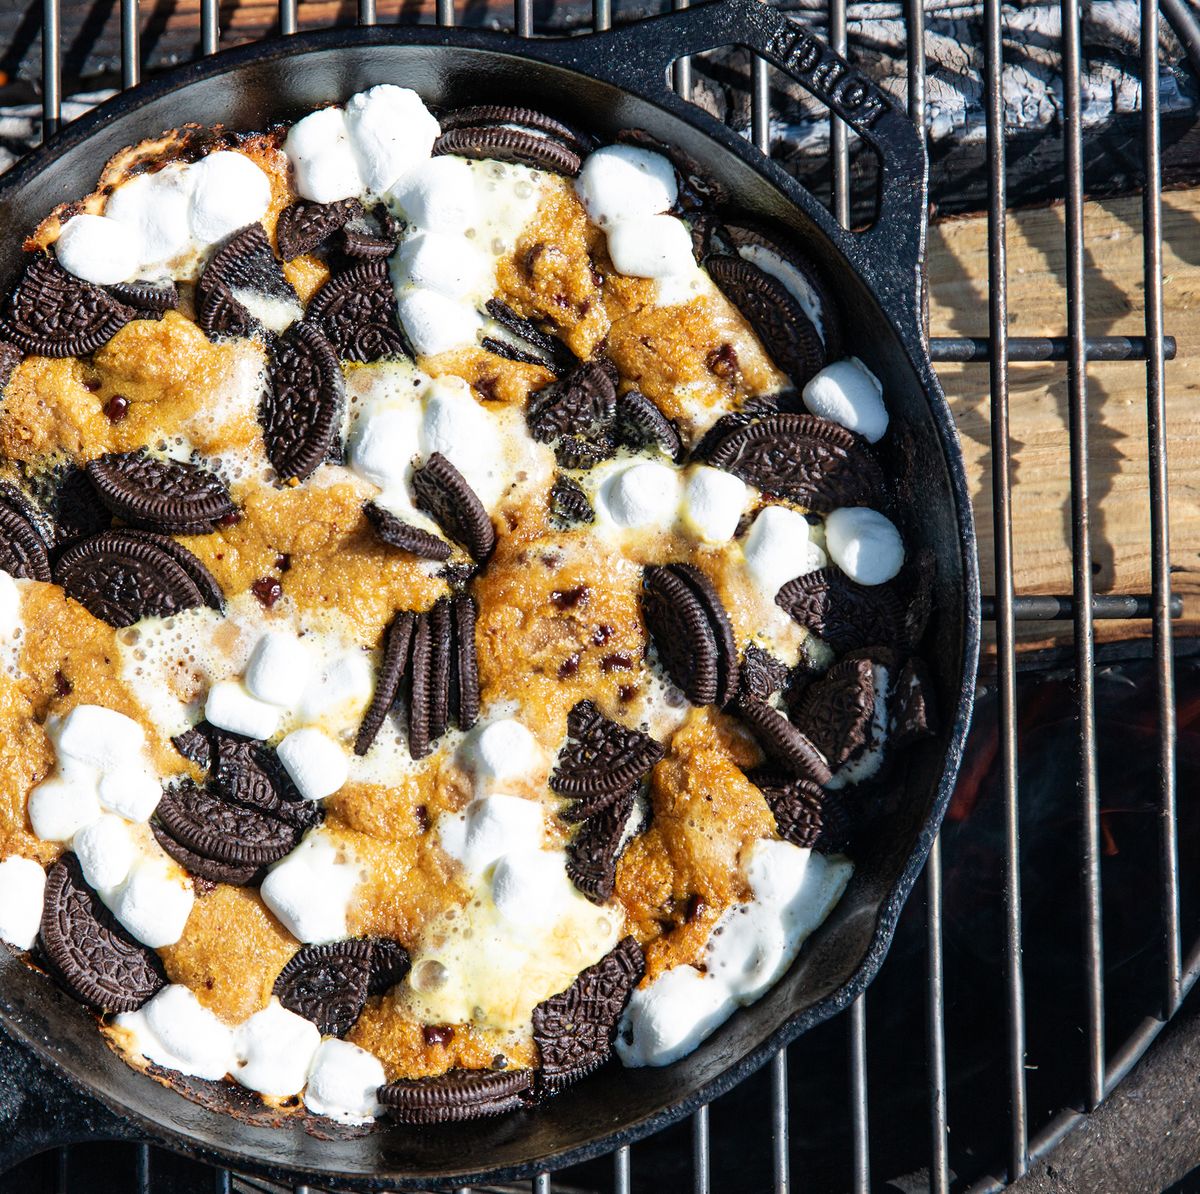 Best Oreo Cookie Skillet Recipe - How To Make An Oreo Cookie Skillet